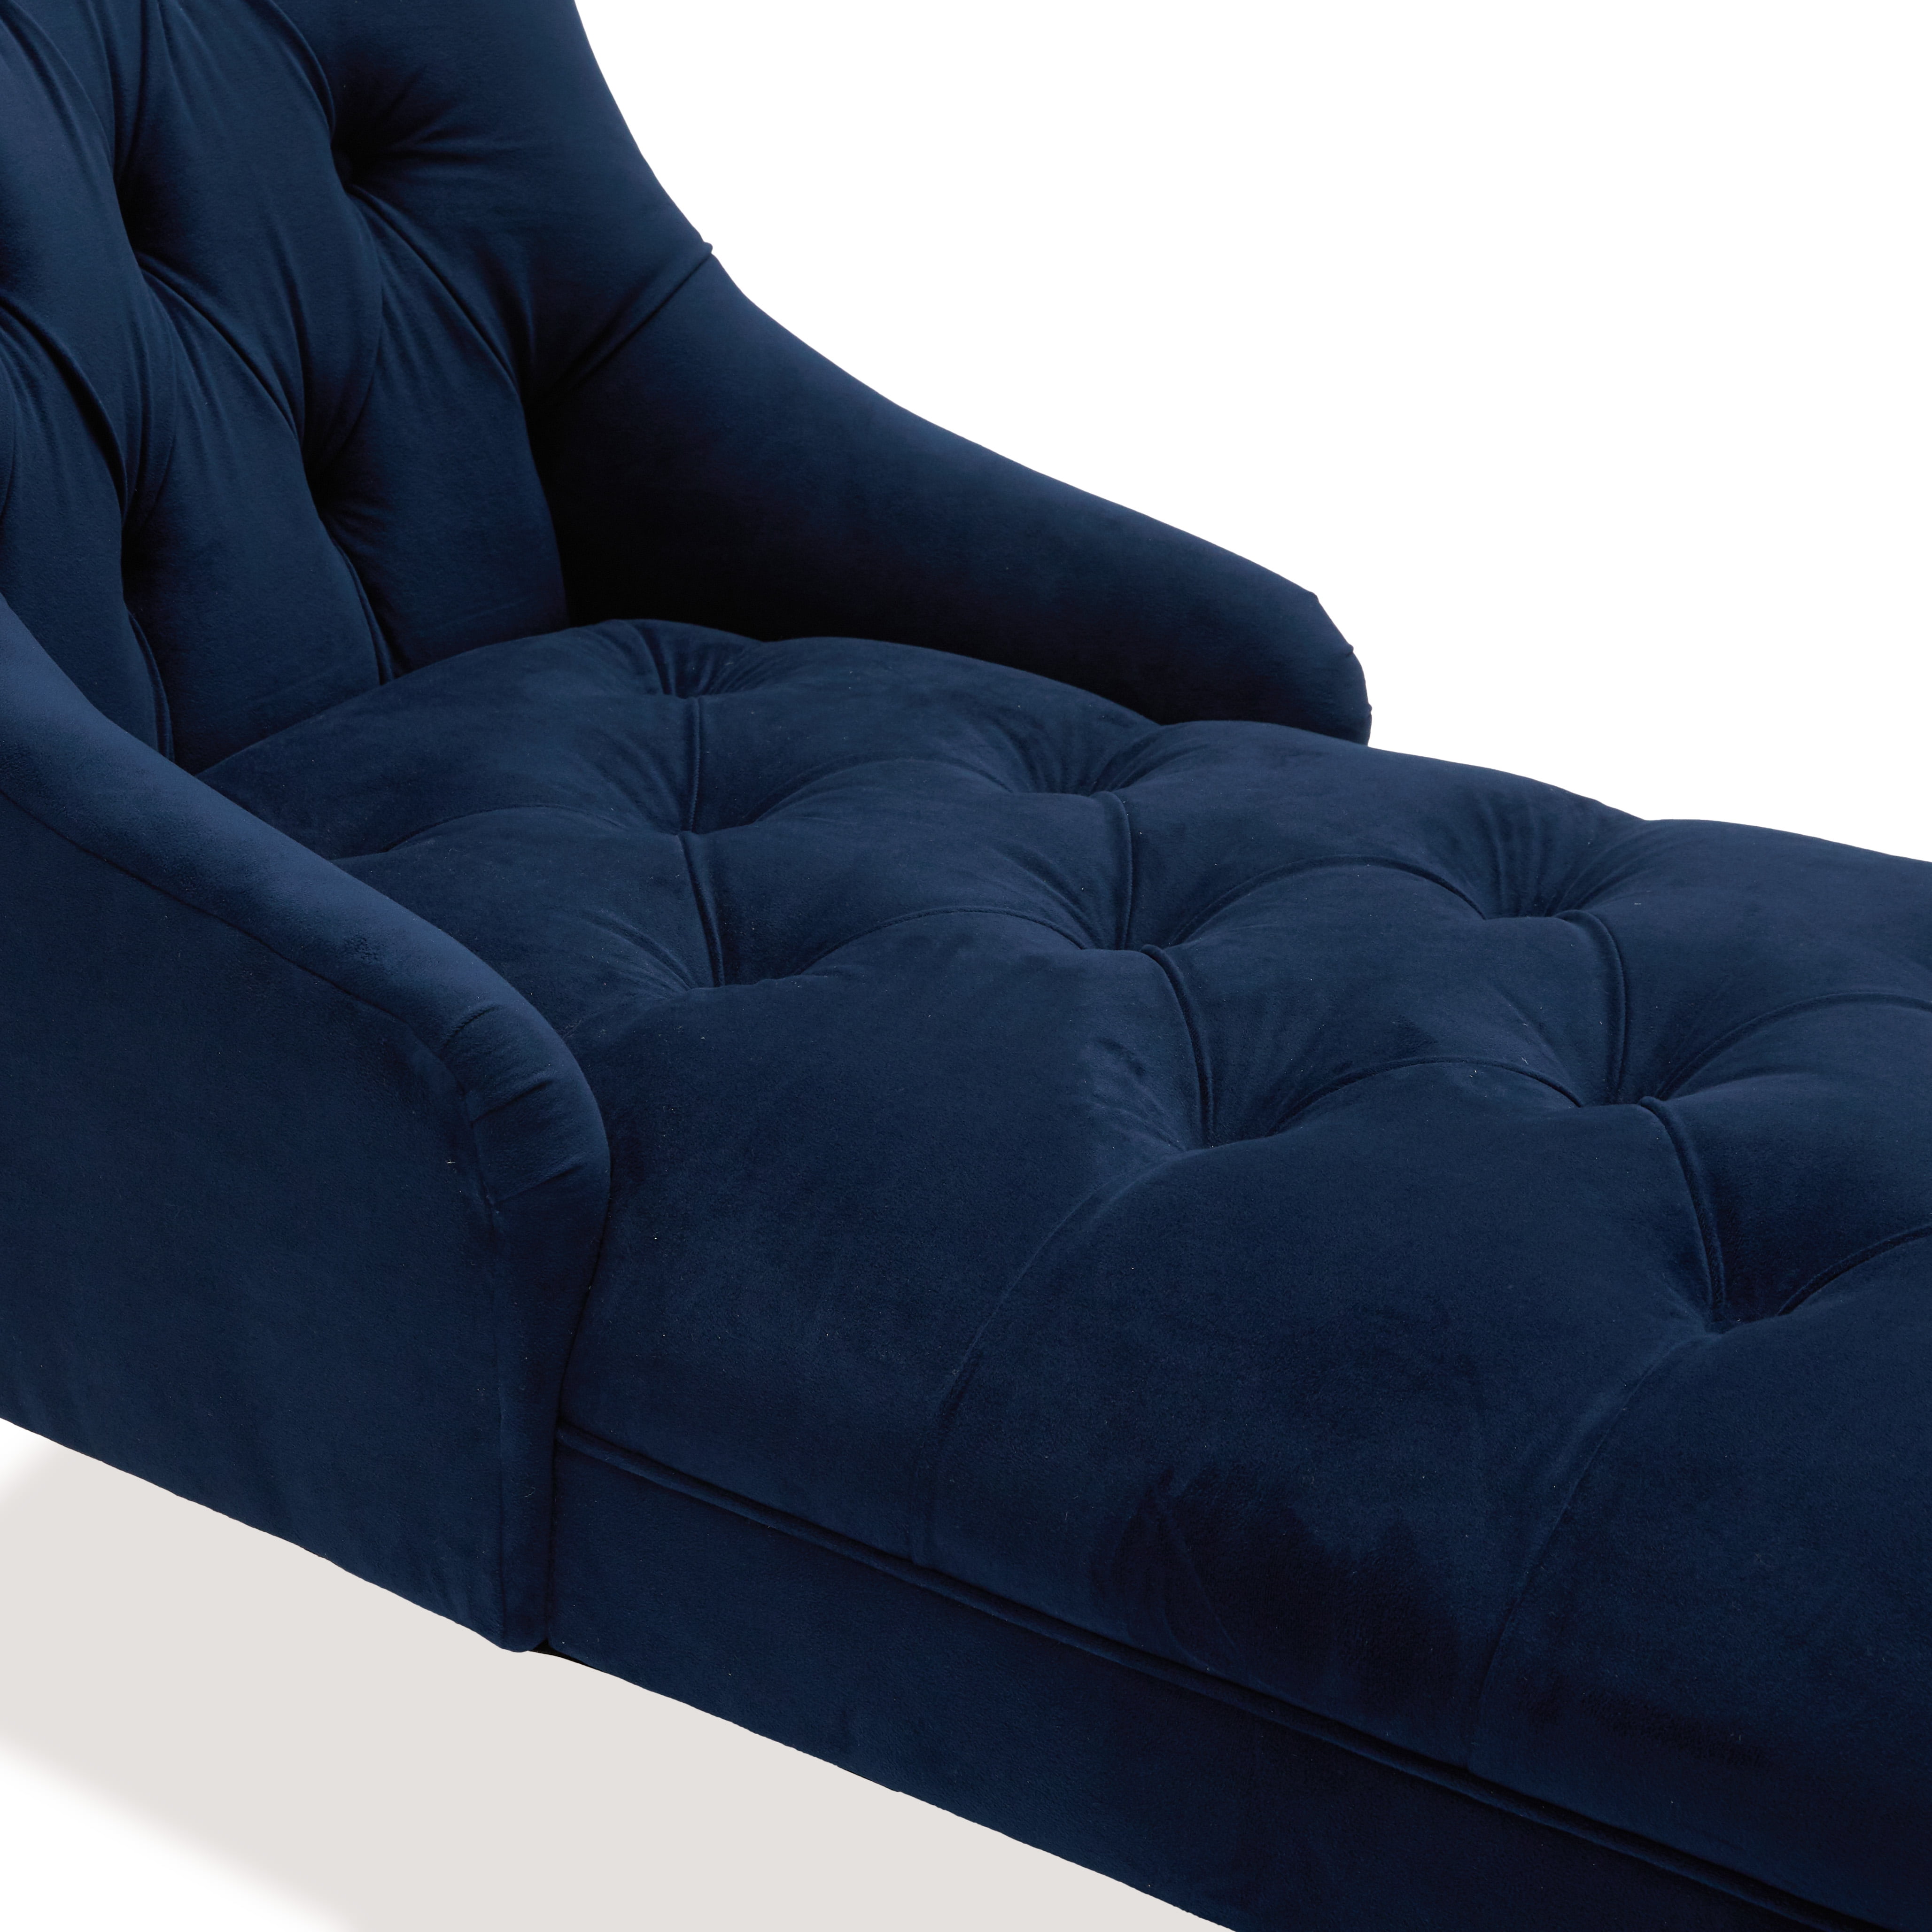 Hug Chaise Longue and Footstool – JoverValls